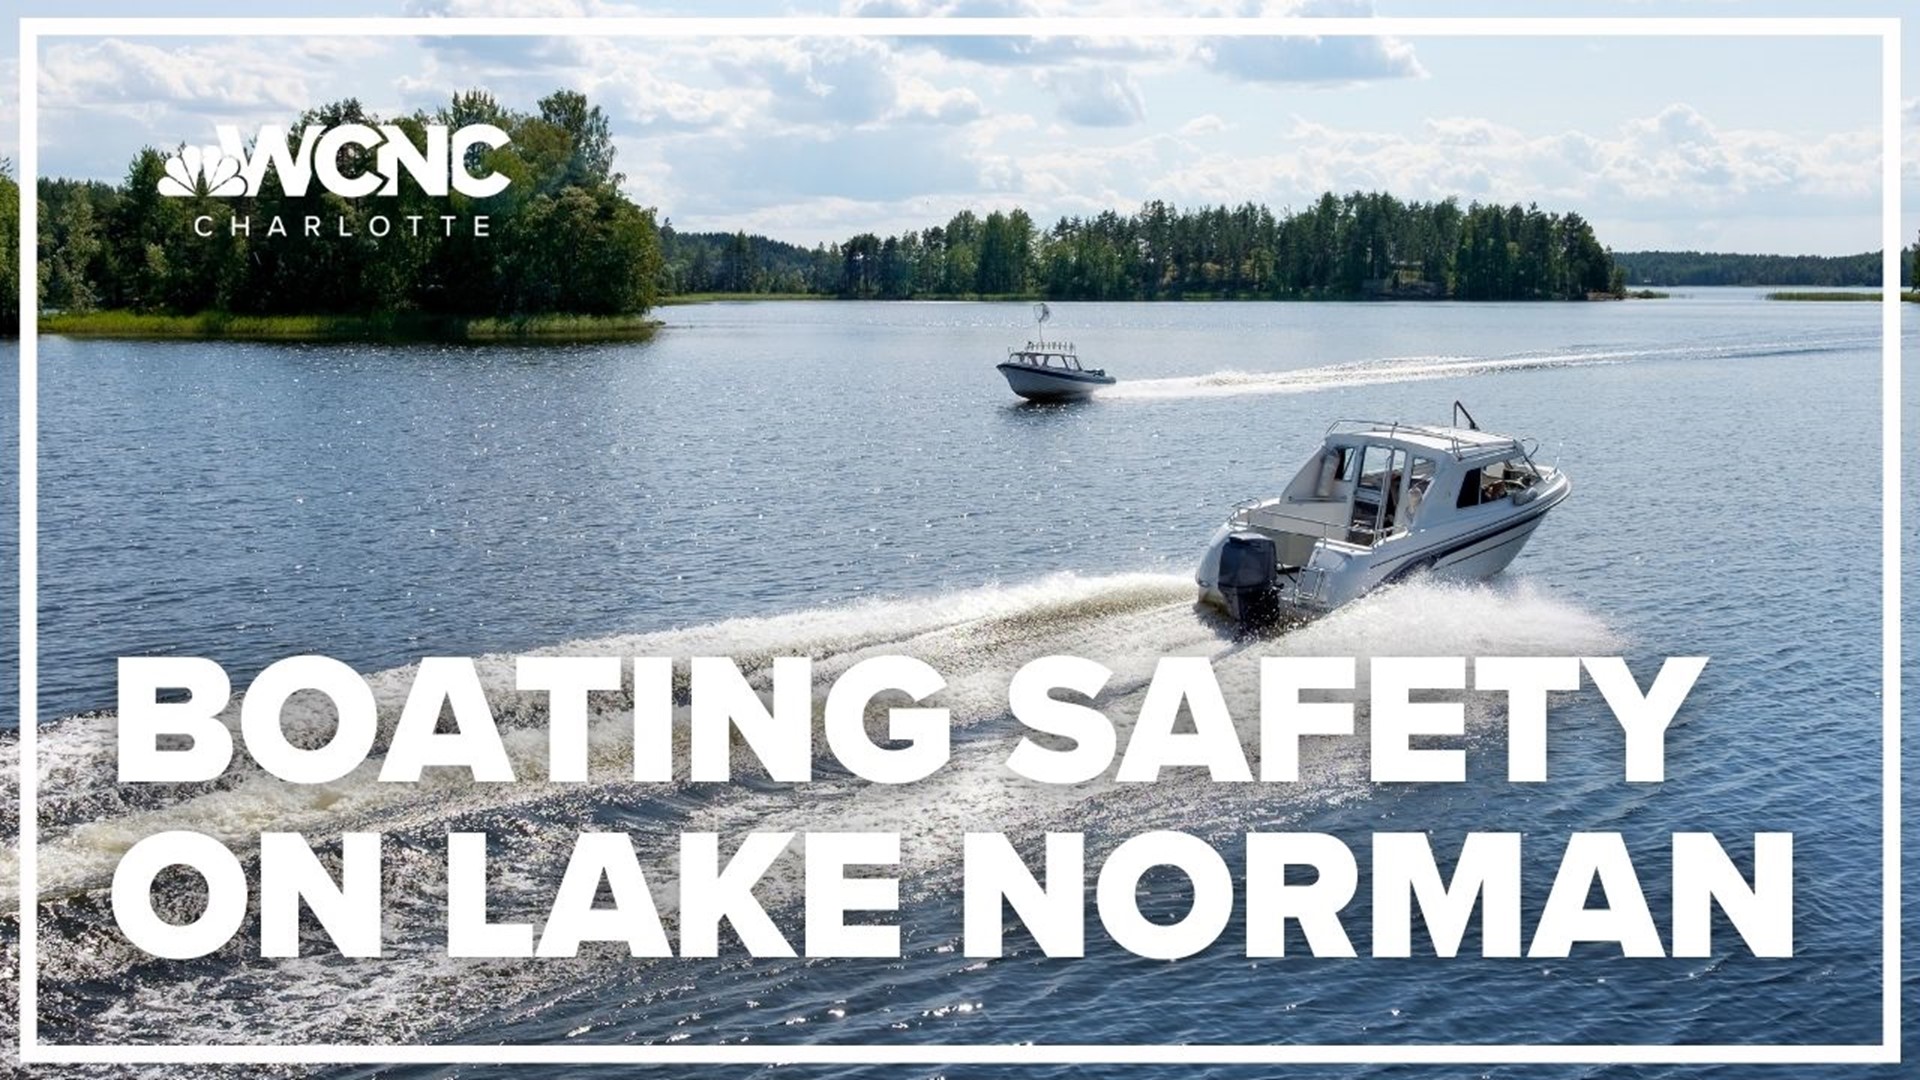 North Carolina wildlife officials spent Memorial Day weekend cruising the waters of Lake Norman to encourage safety while having a good time.